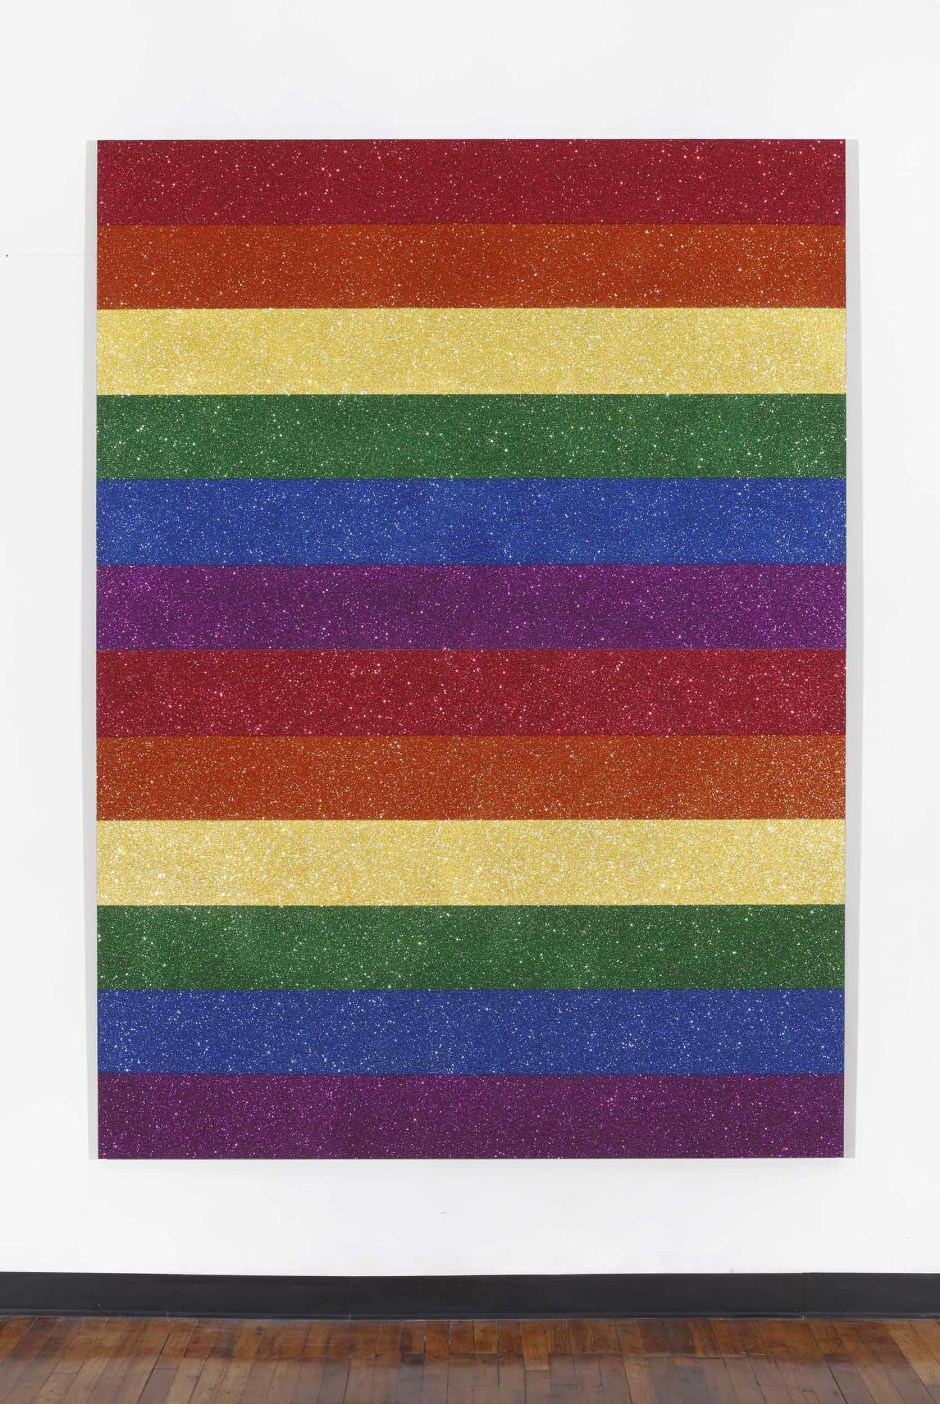 Double Rainbow Flag for Jasper in the Style of the Artists Boyfriend, 2013  signed and dated on verso  glitter and enamel on canvas  249.6 x 183.5 cm 98 1/4 x 72 1/4 in.